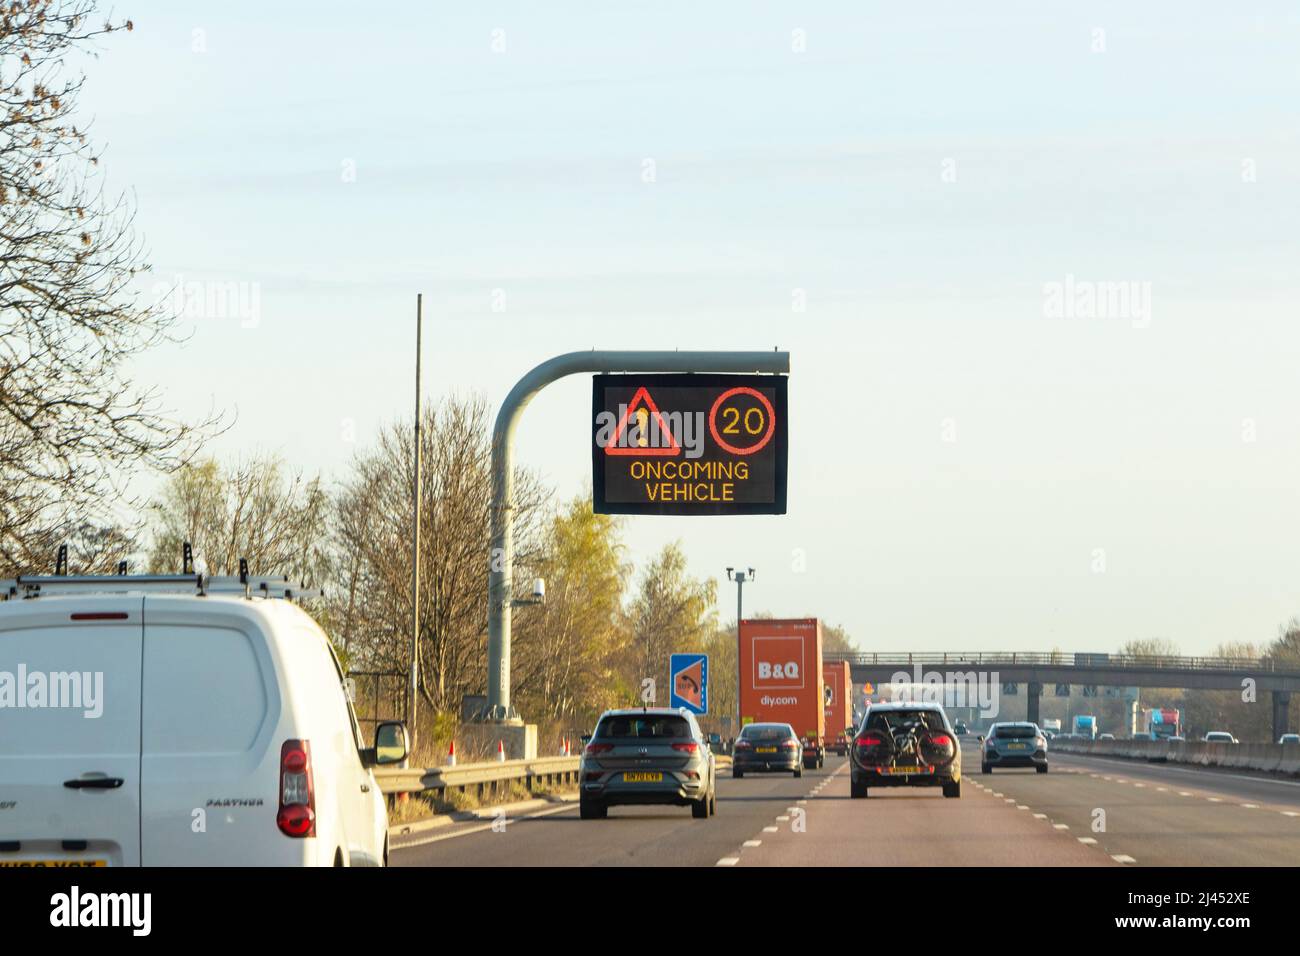 warning matrix sign on gantry with oncoming vehicle and 20 mph sign on M6 uk motorway Stock Photo